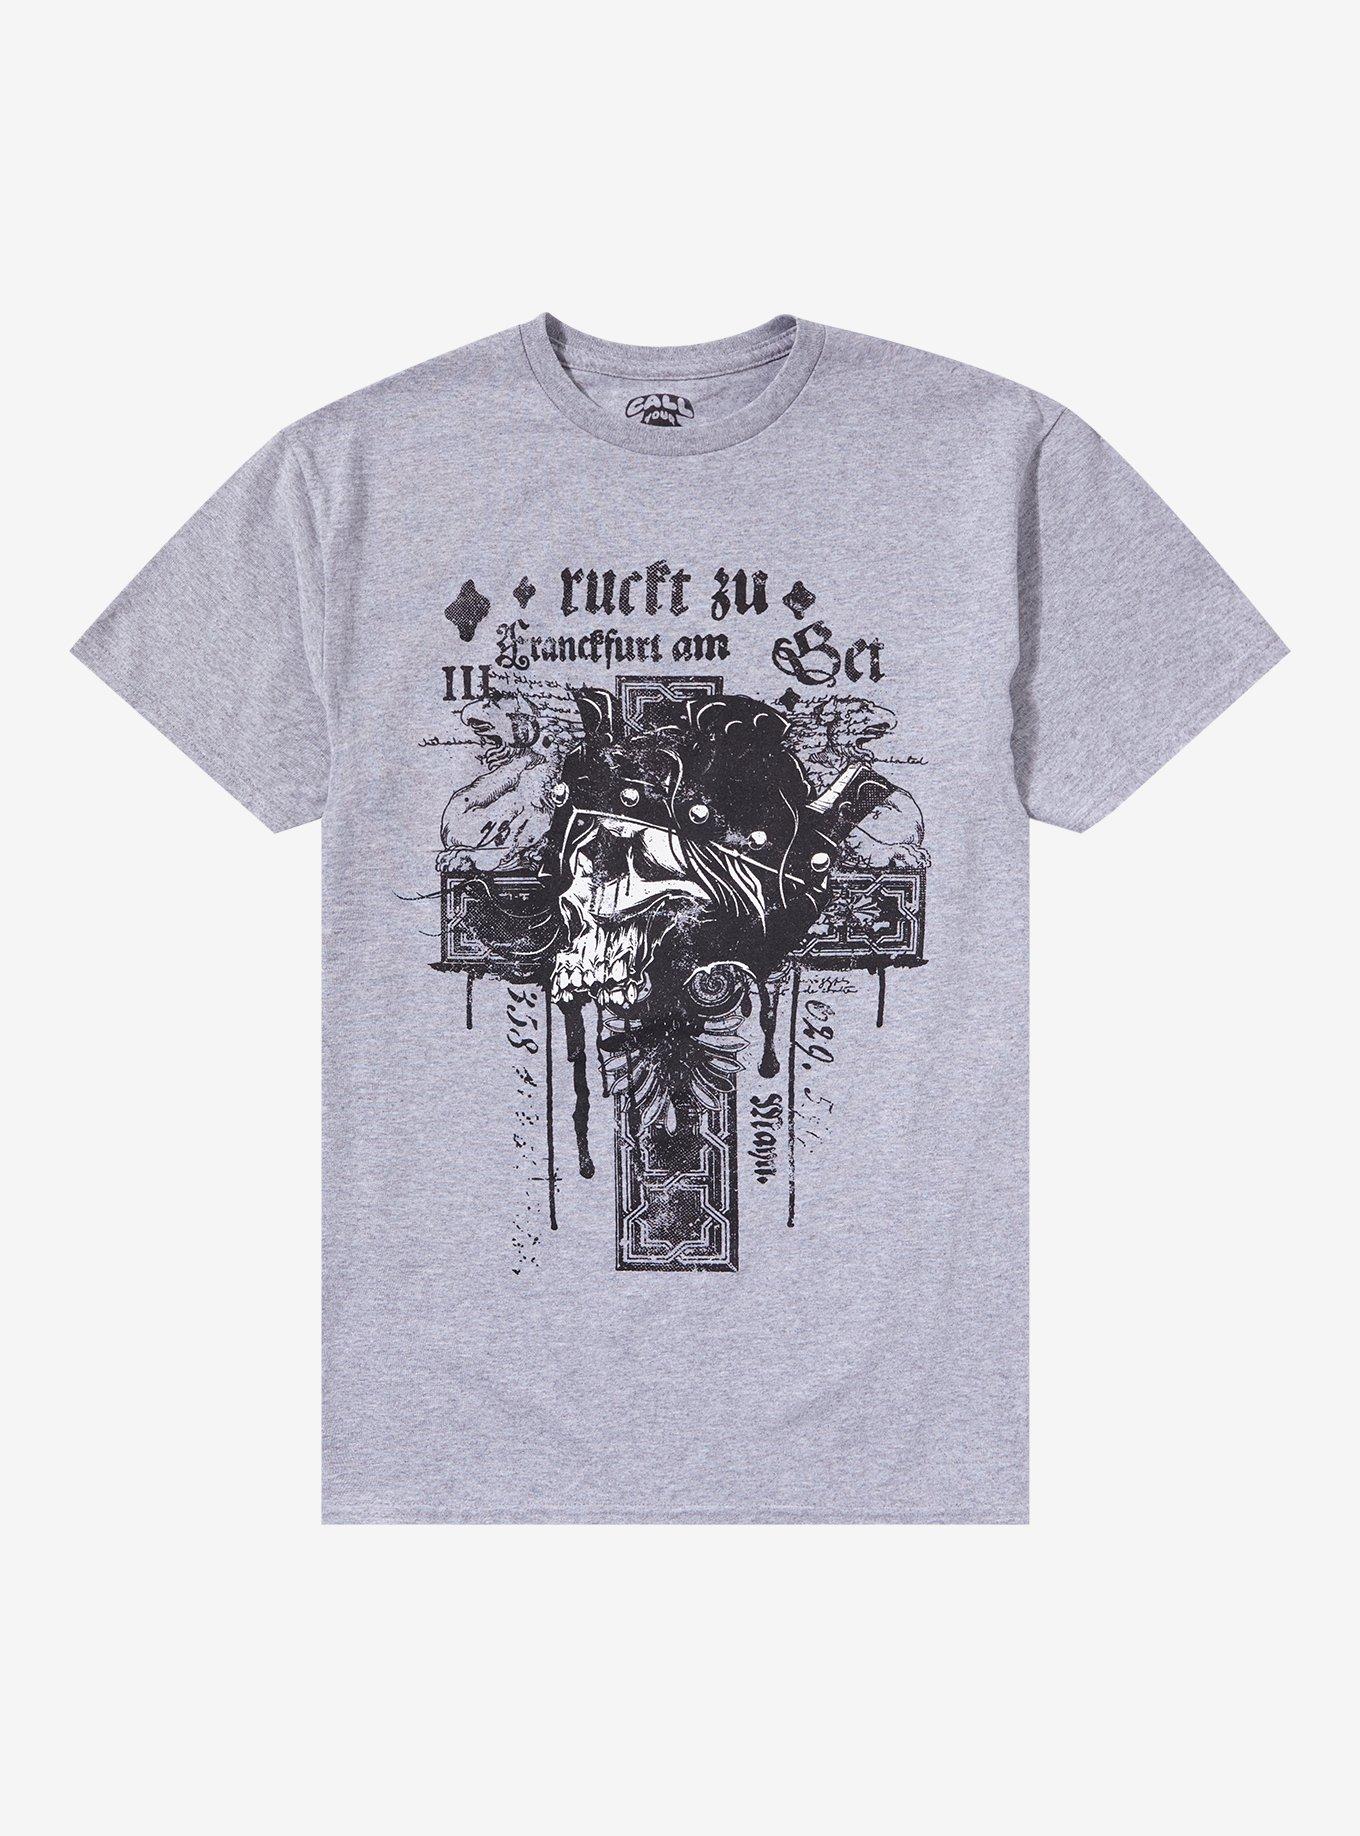 Crowned Skull & Cross T-Shirt By Call Your Mother, HEATHER GREY, hi-res